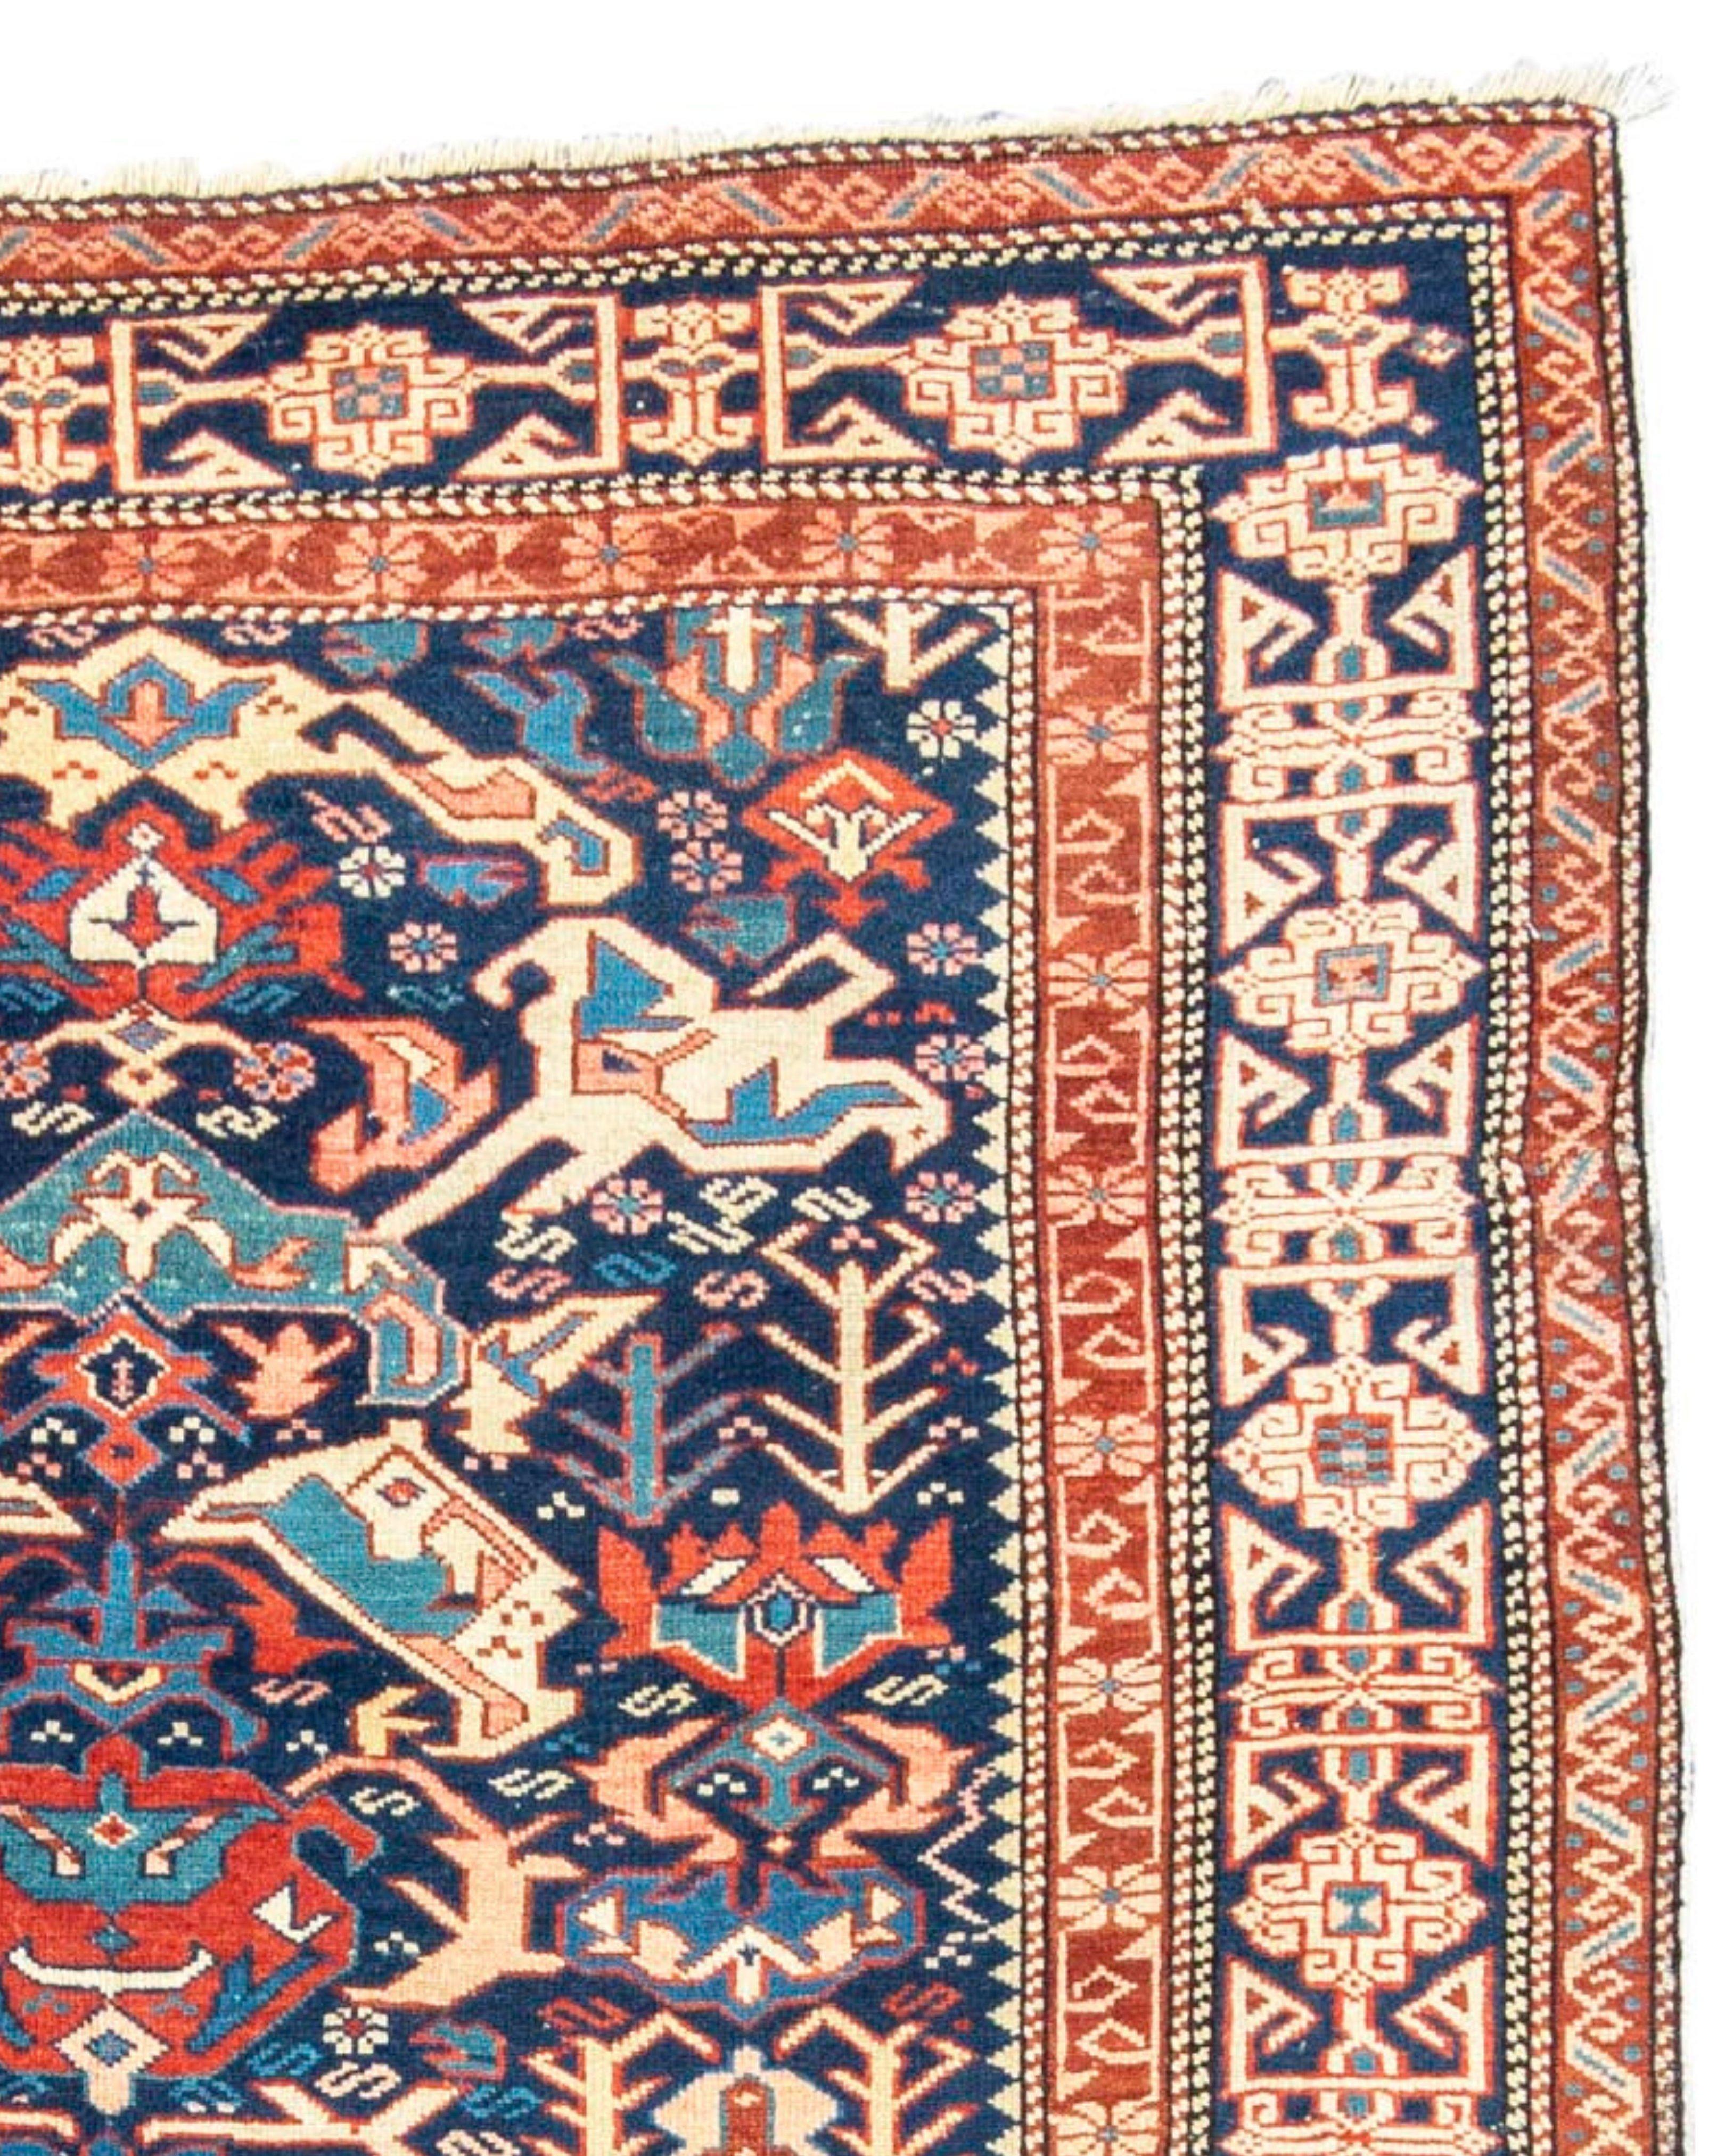 Antique Caucasian Kuba Rug, Late 19th Century In Excellent Condition For Sale In San Francisco, CA